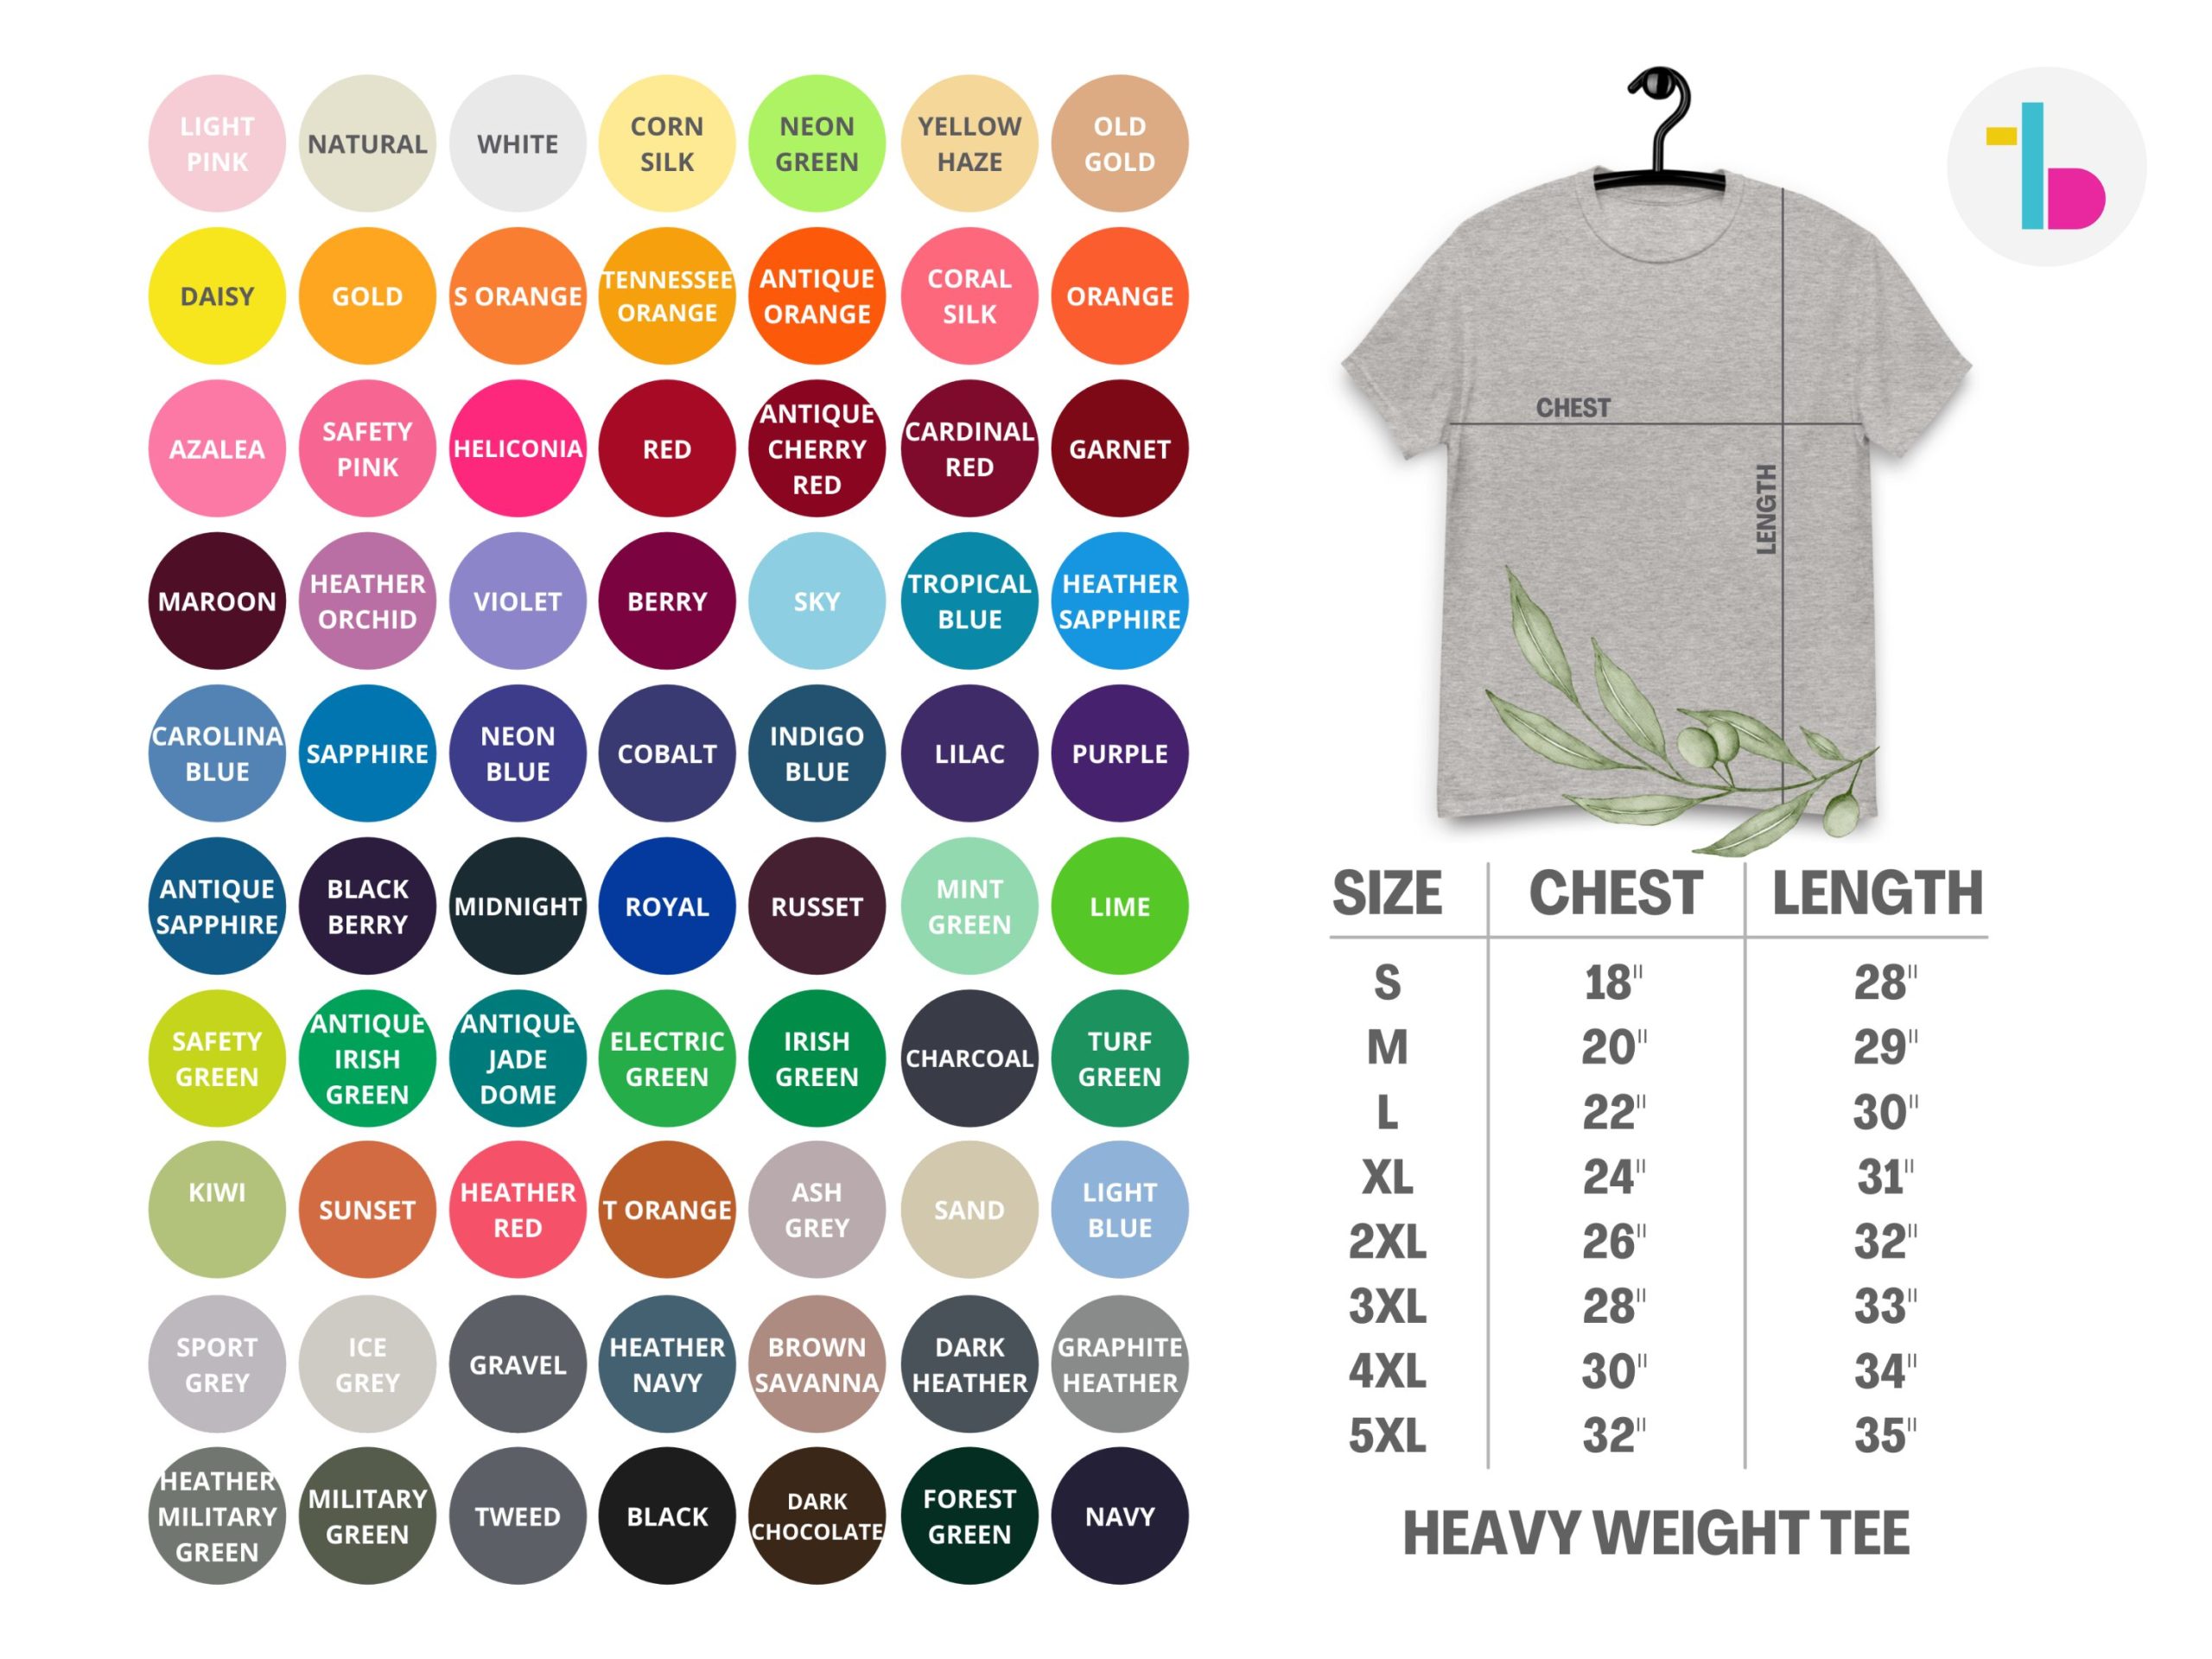 Mens shirts size and color chart